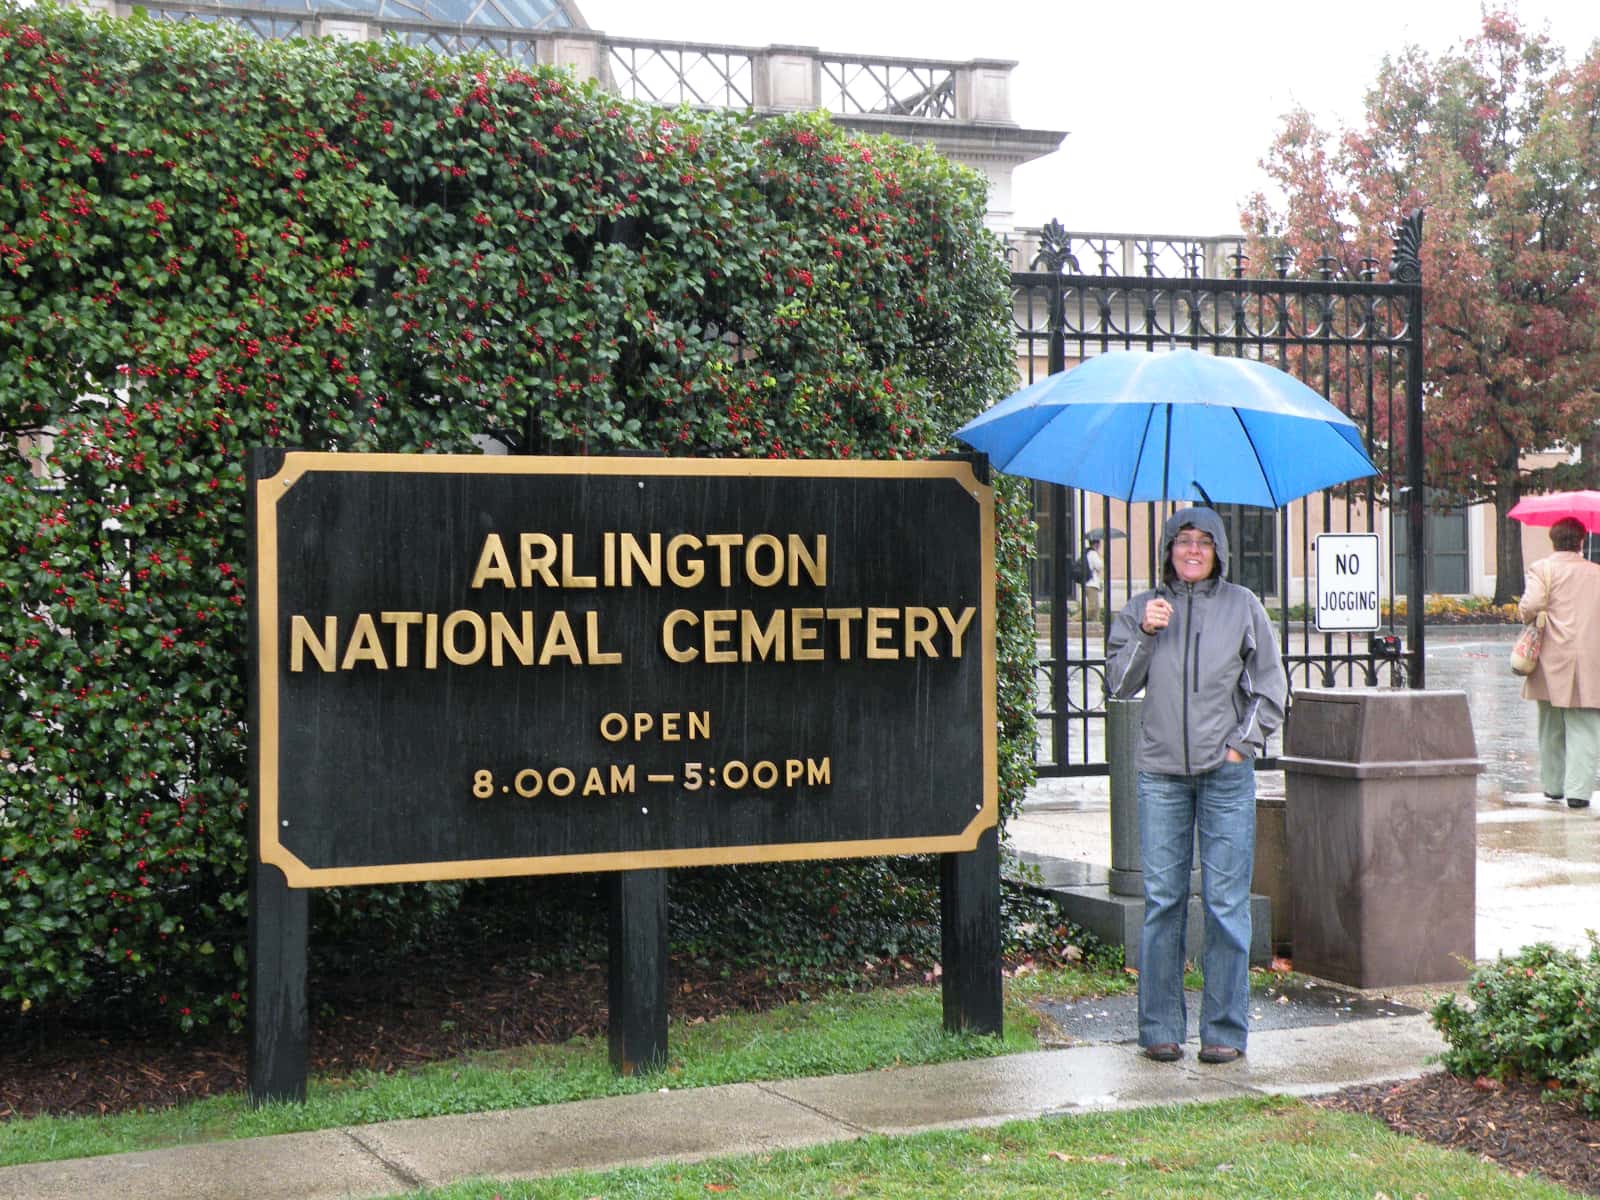 Woman standing with blue umbrella next to Arlington National cemetery sign